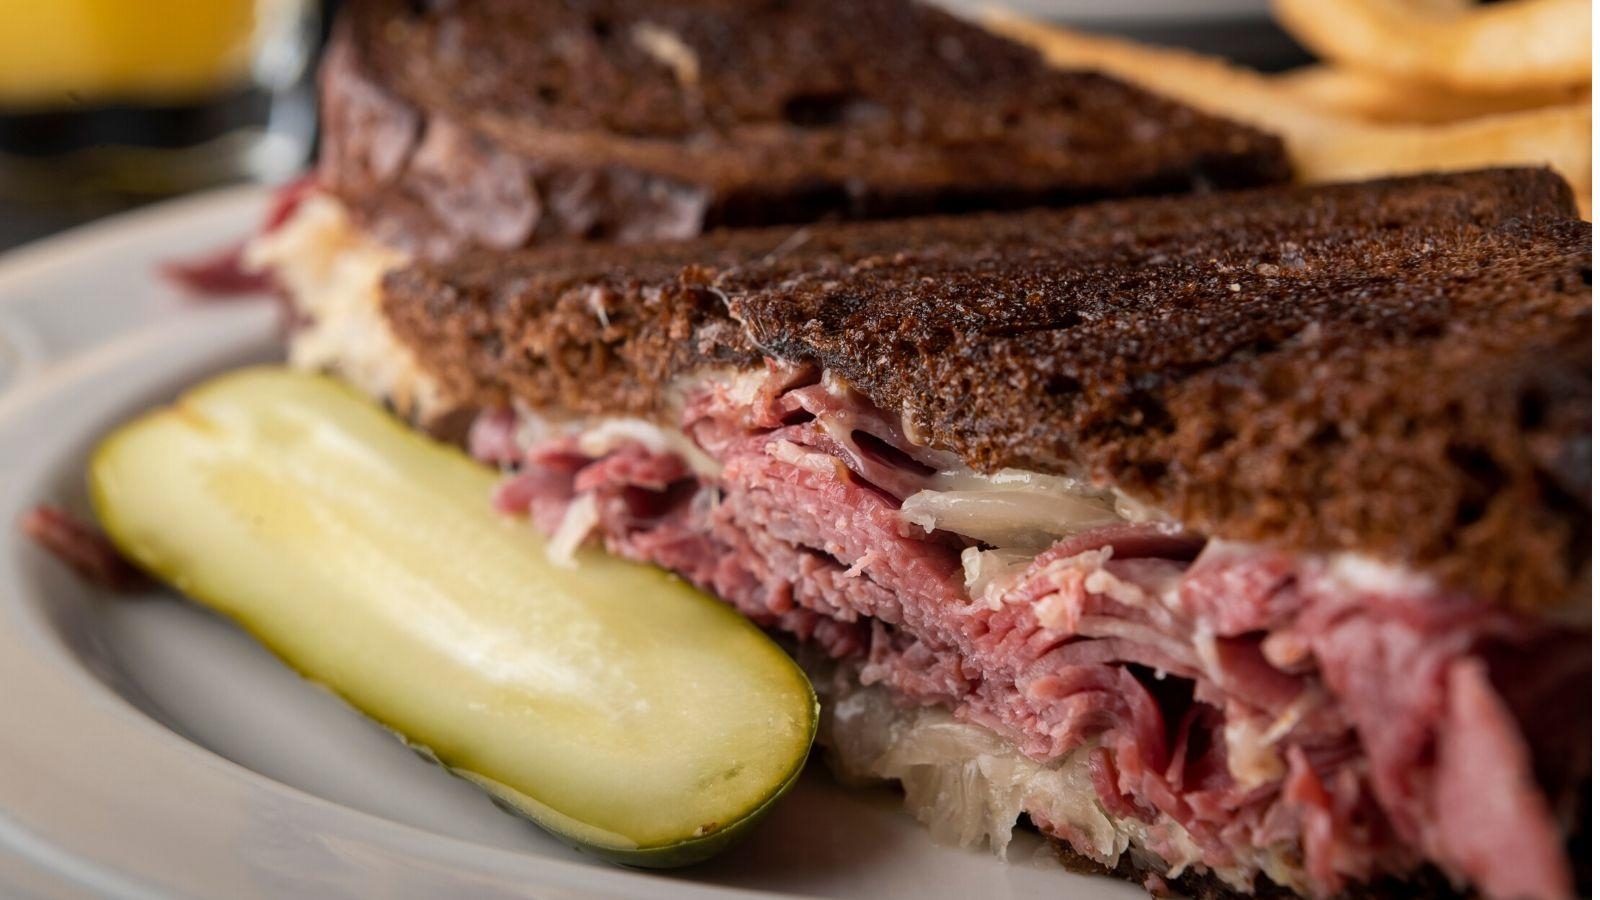 Here's Where to Get Your Jewish Deli Fix During the Pandemic | The Nosher